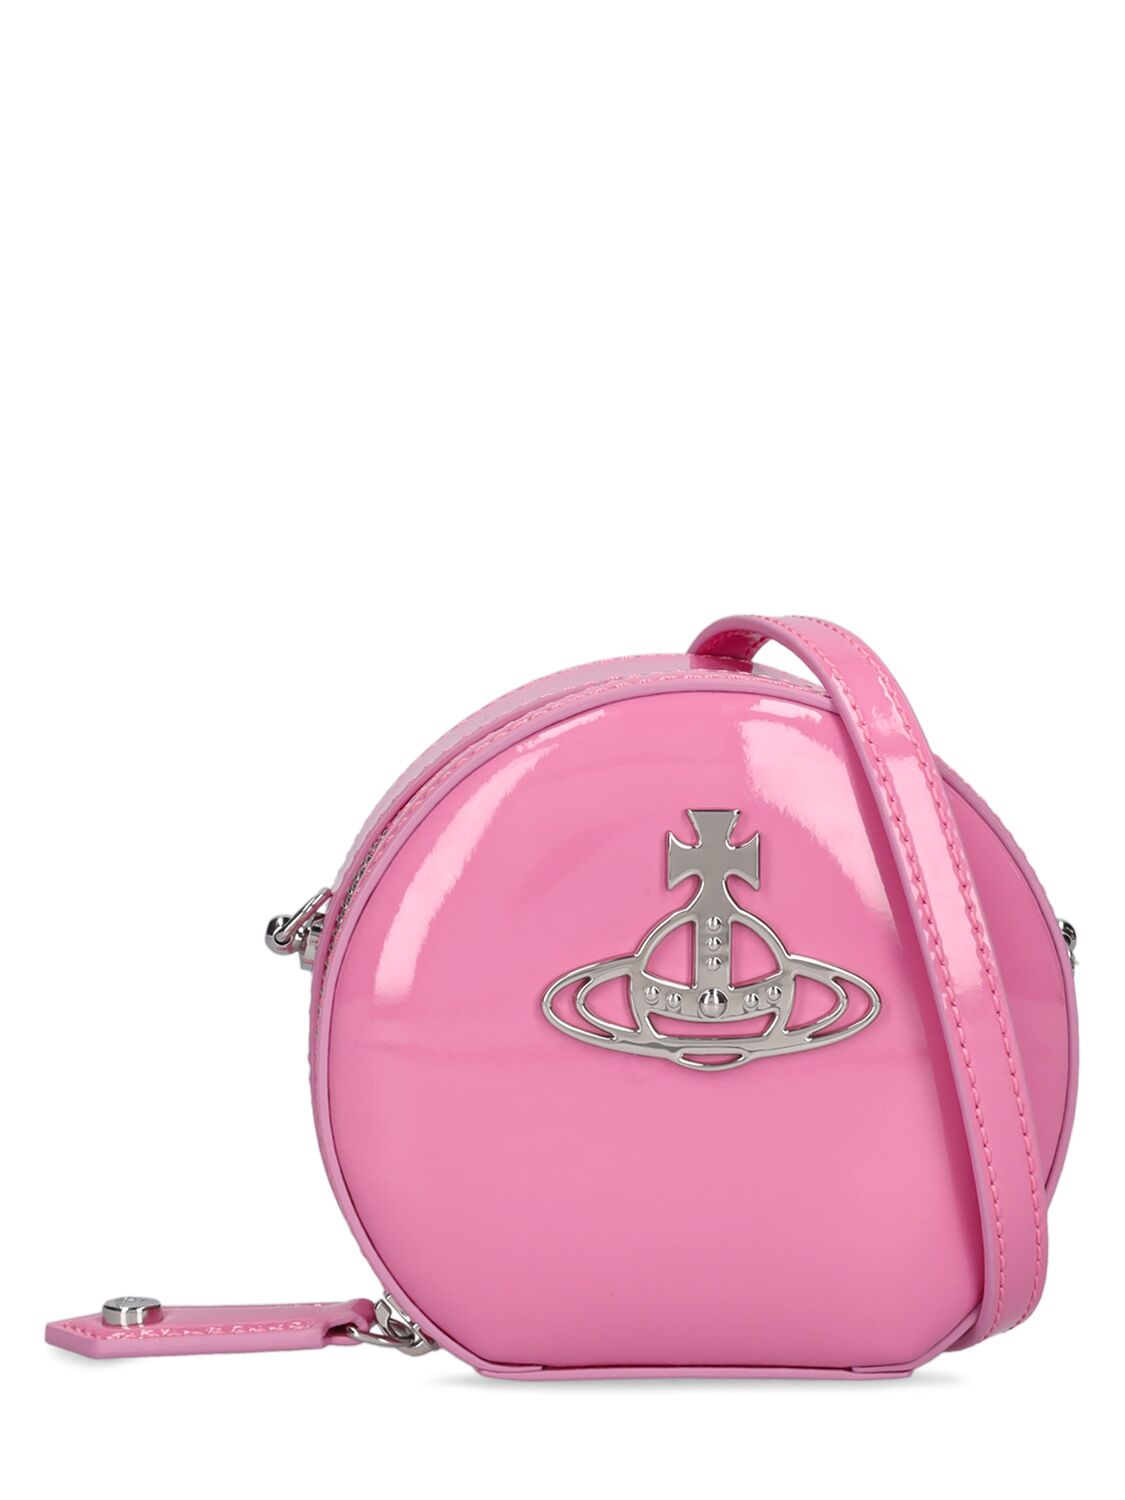 Vivienne Westwood Mini Round Patent Leather Crossbody Bag In Pink